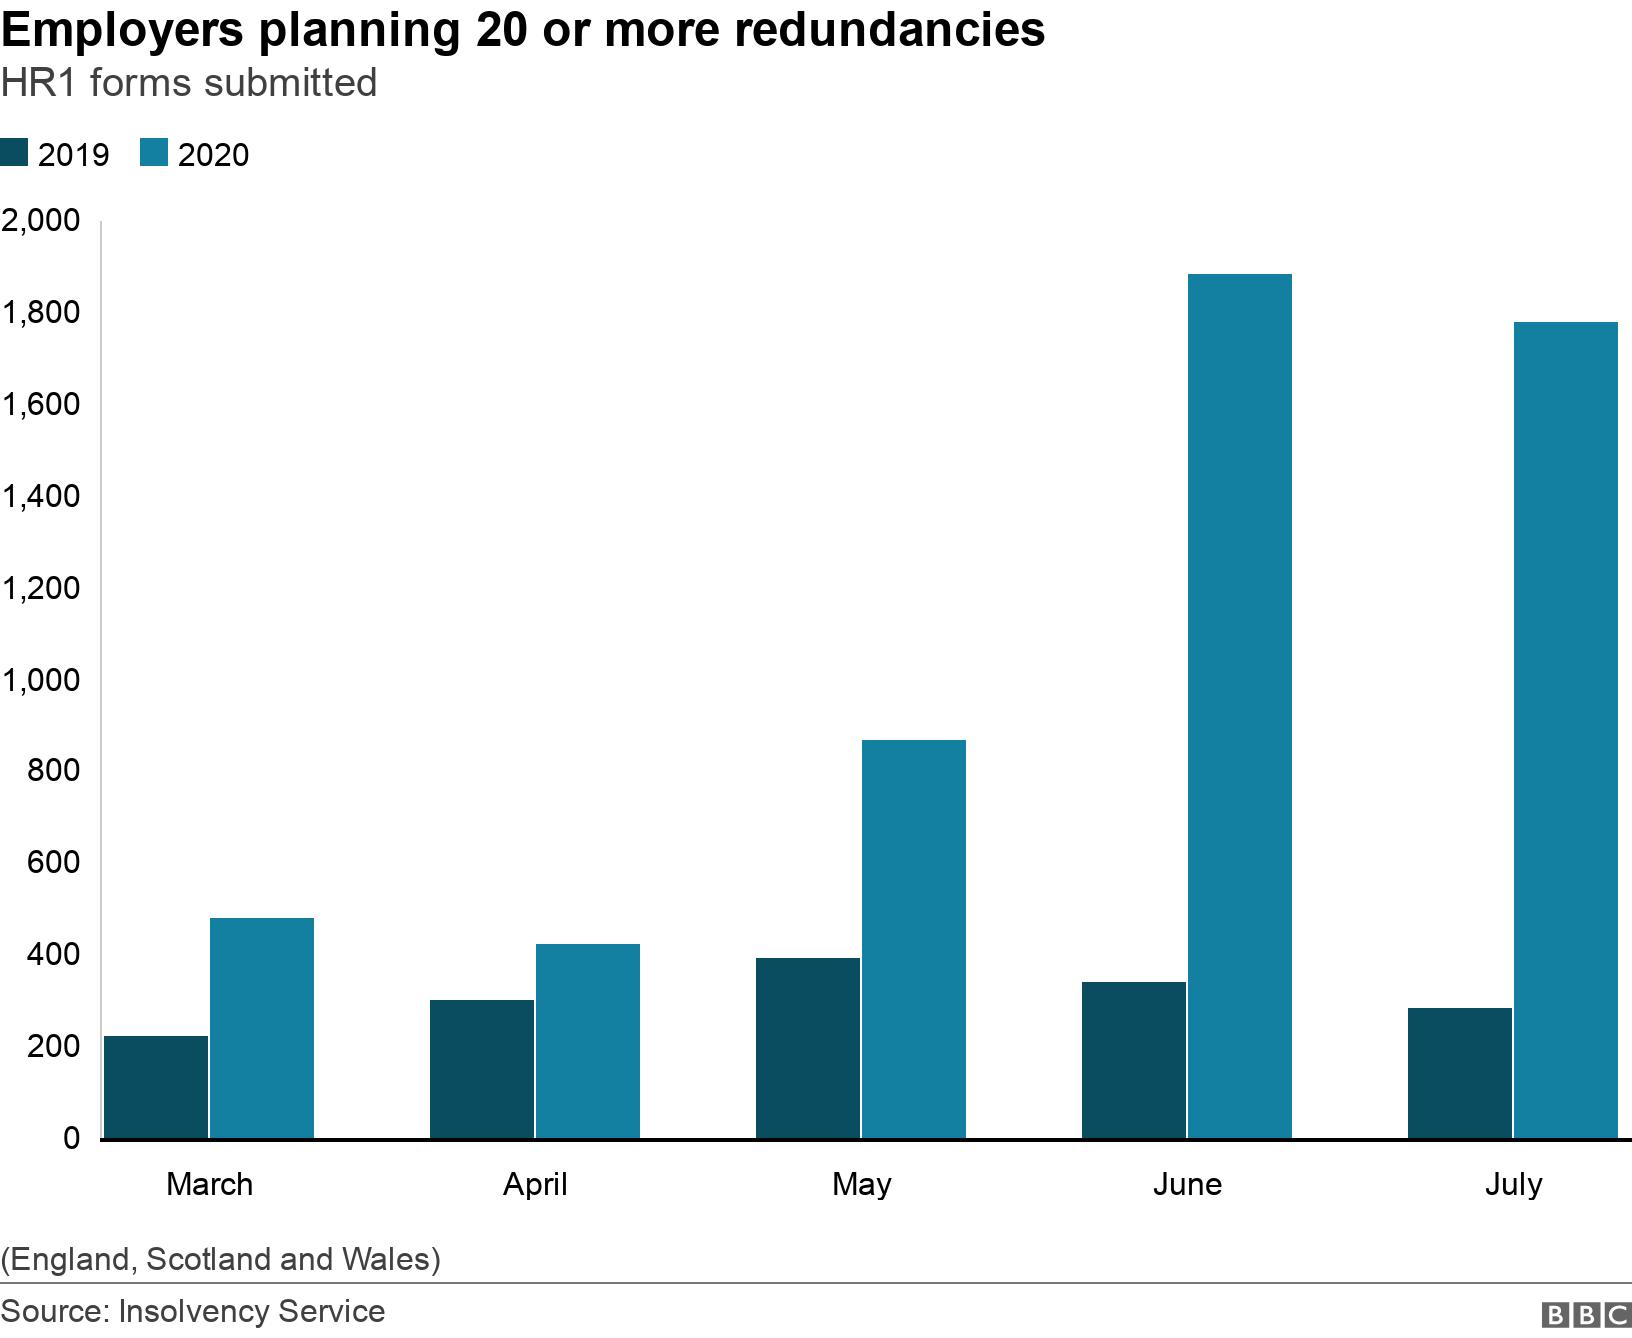 Employers planning 20 or more redundancies. HR1 forms submitted. The number of firms submitting notice of 20 or more redundancies by month from March to July 2020 with 2019 figures for comparison (England, Scotland and Wales).